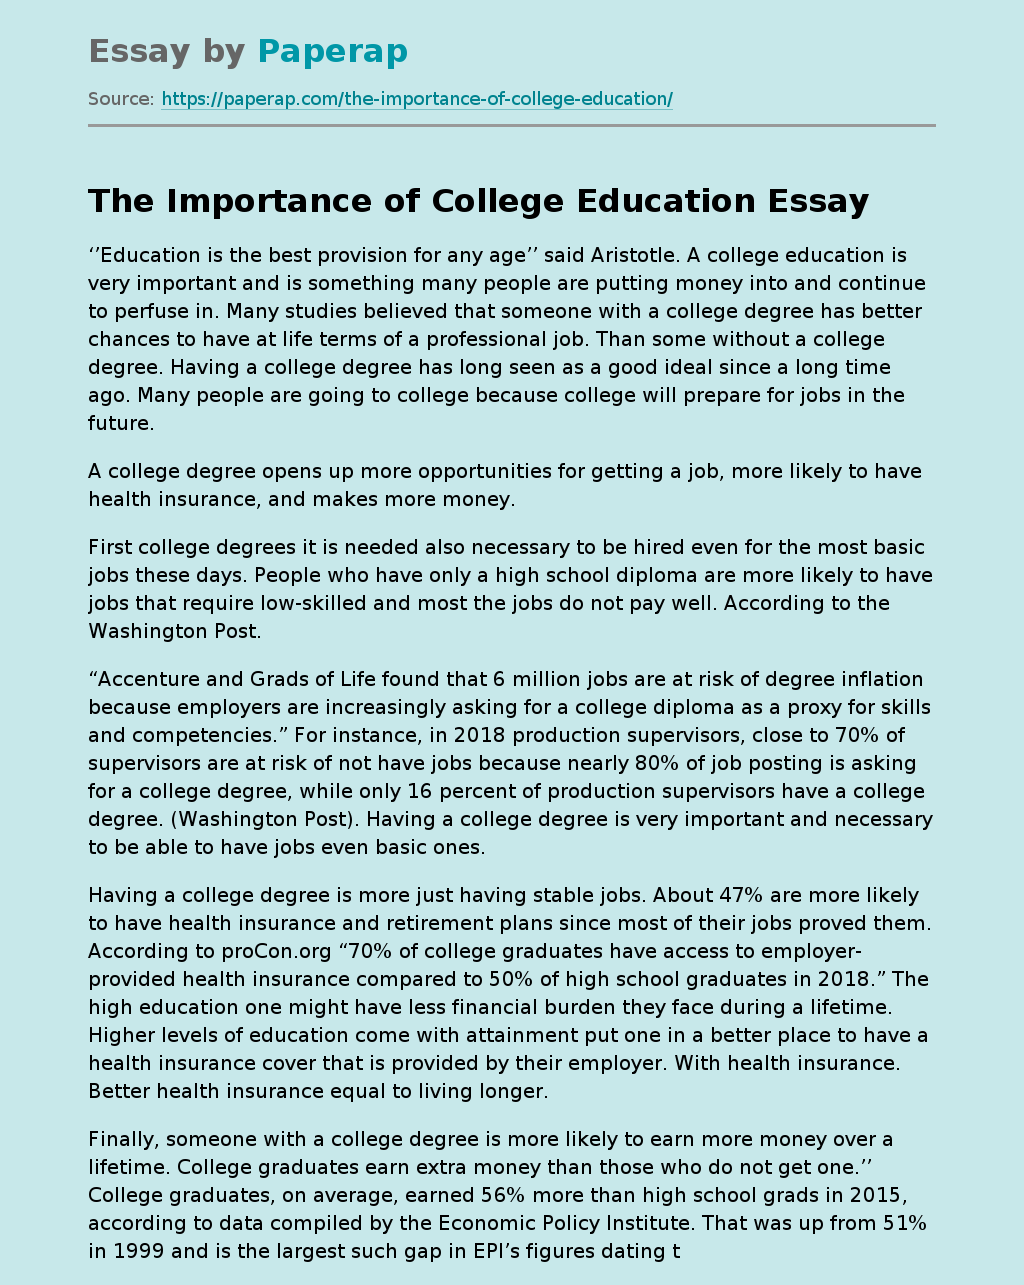 The Importance of College Education